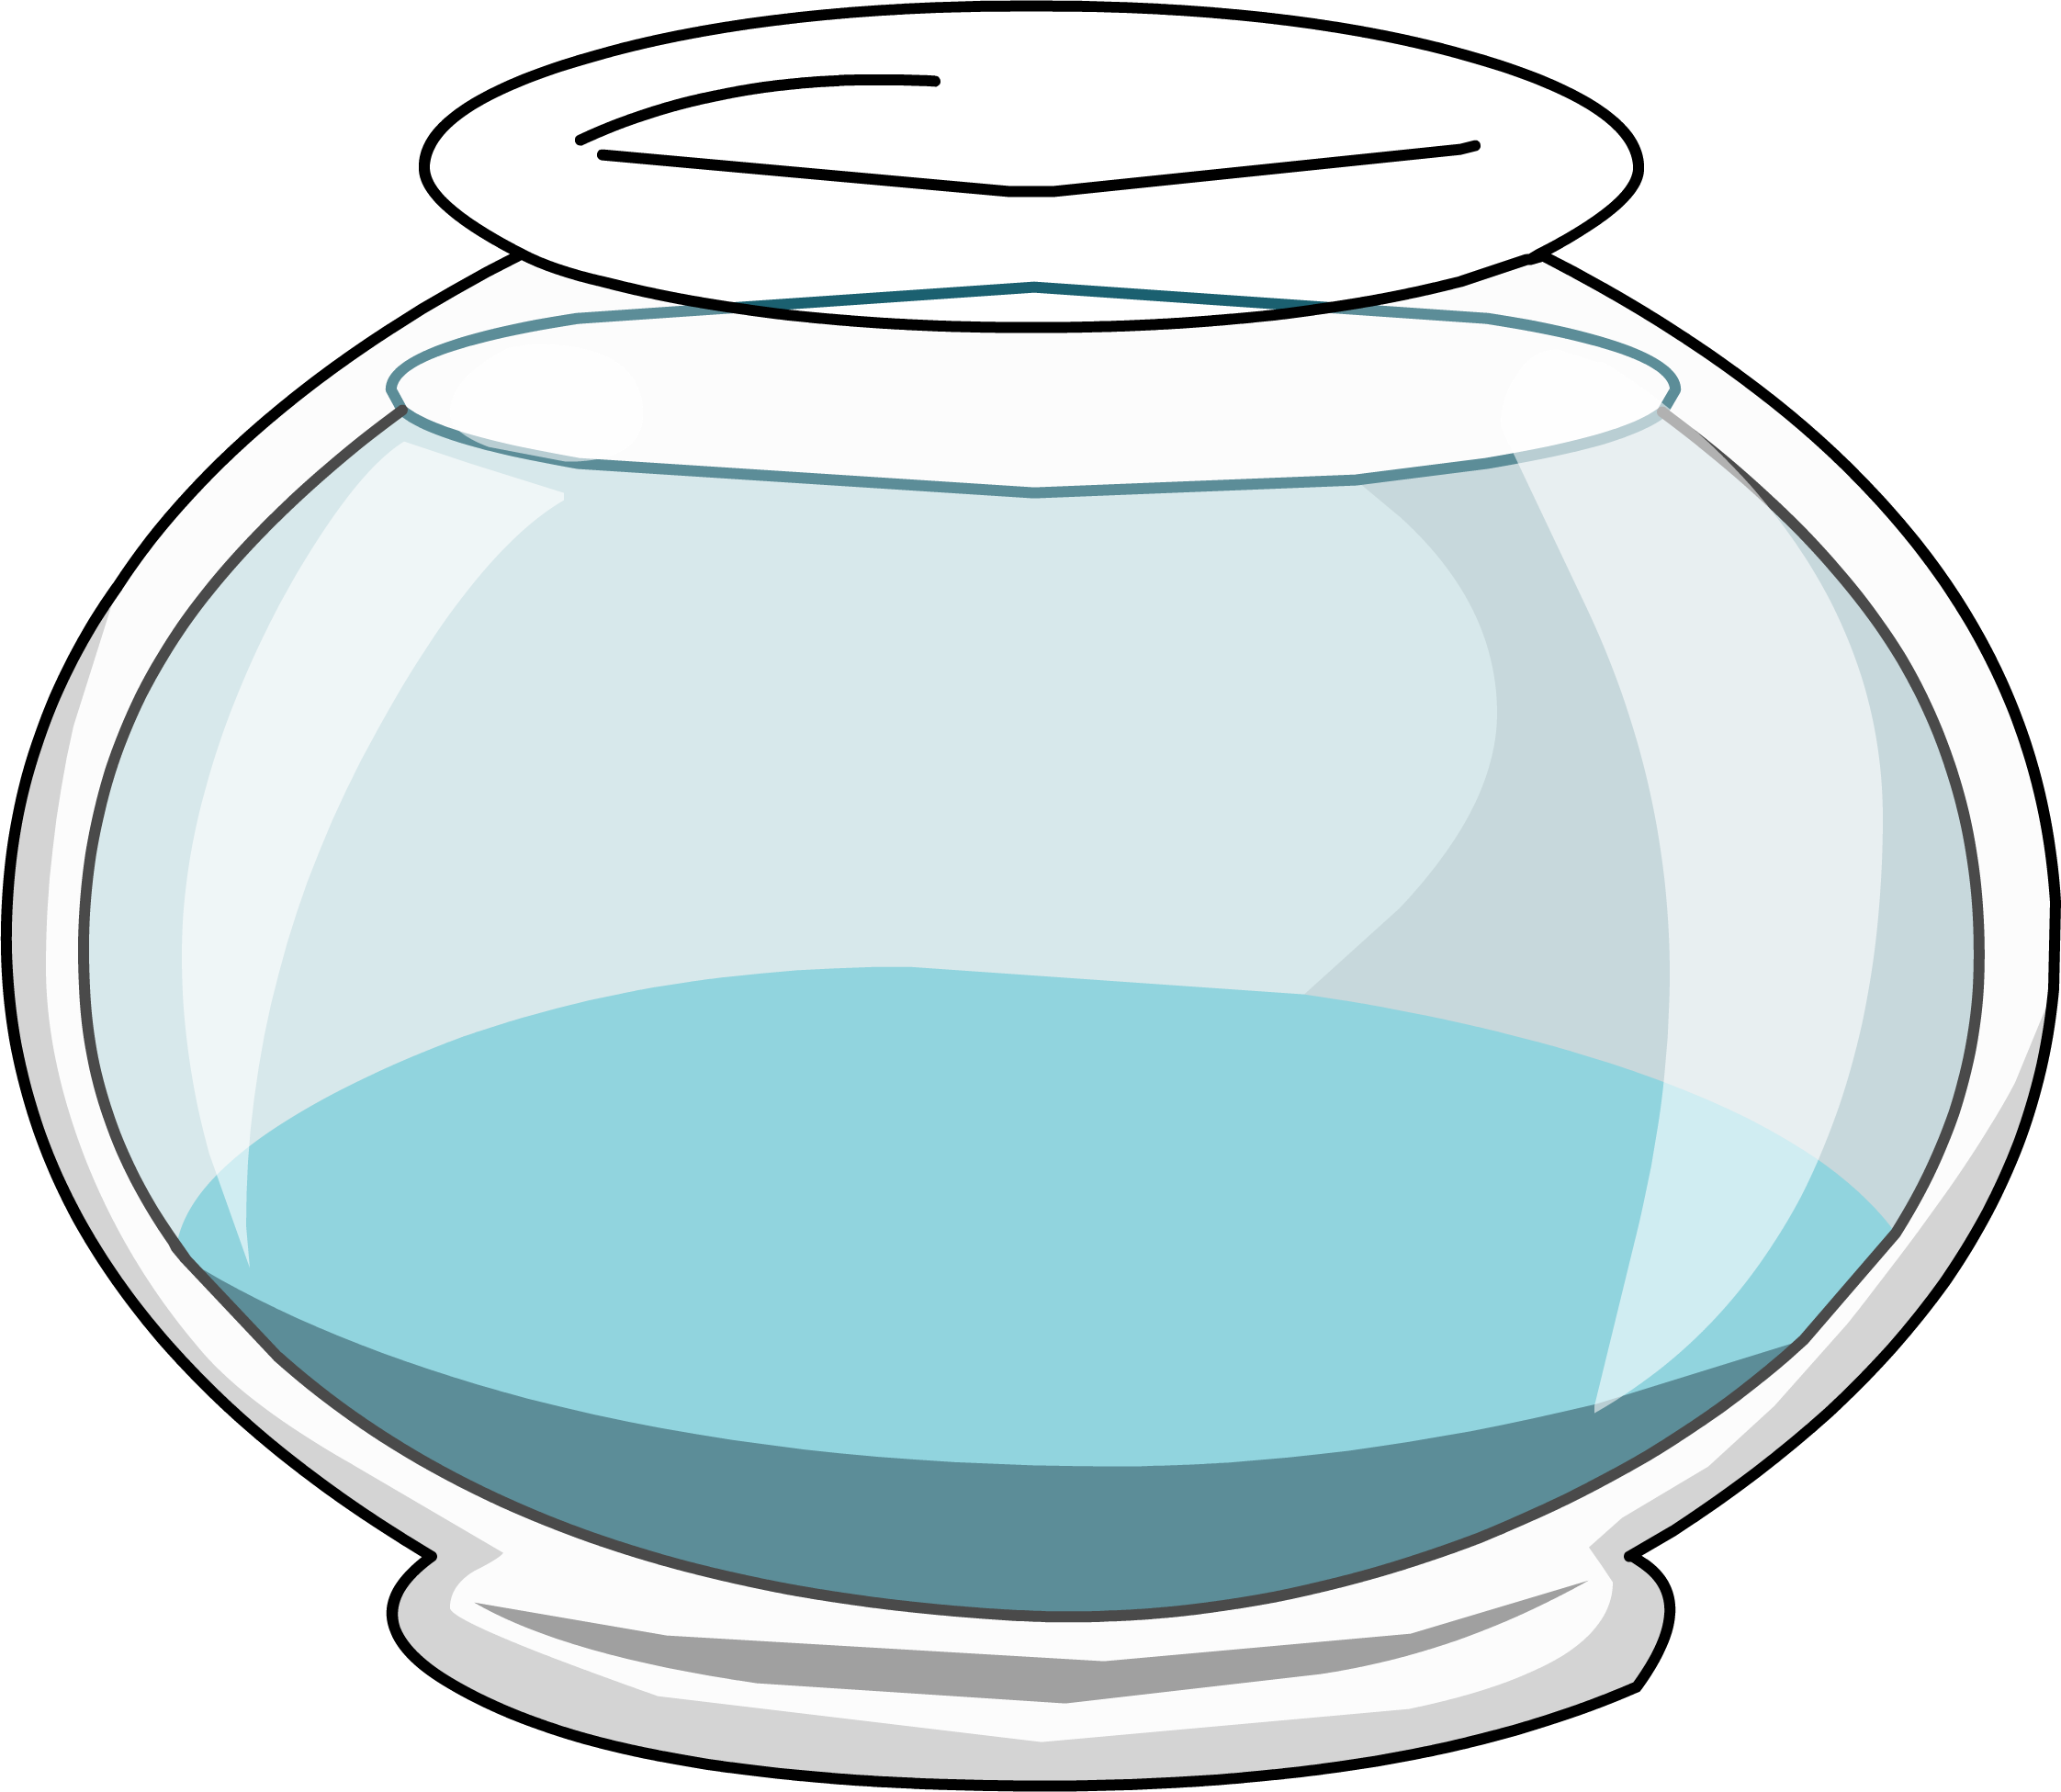 Empty Fish Bowl Coloring Page - ClipArt Best